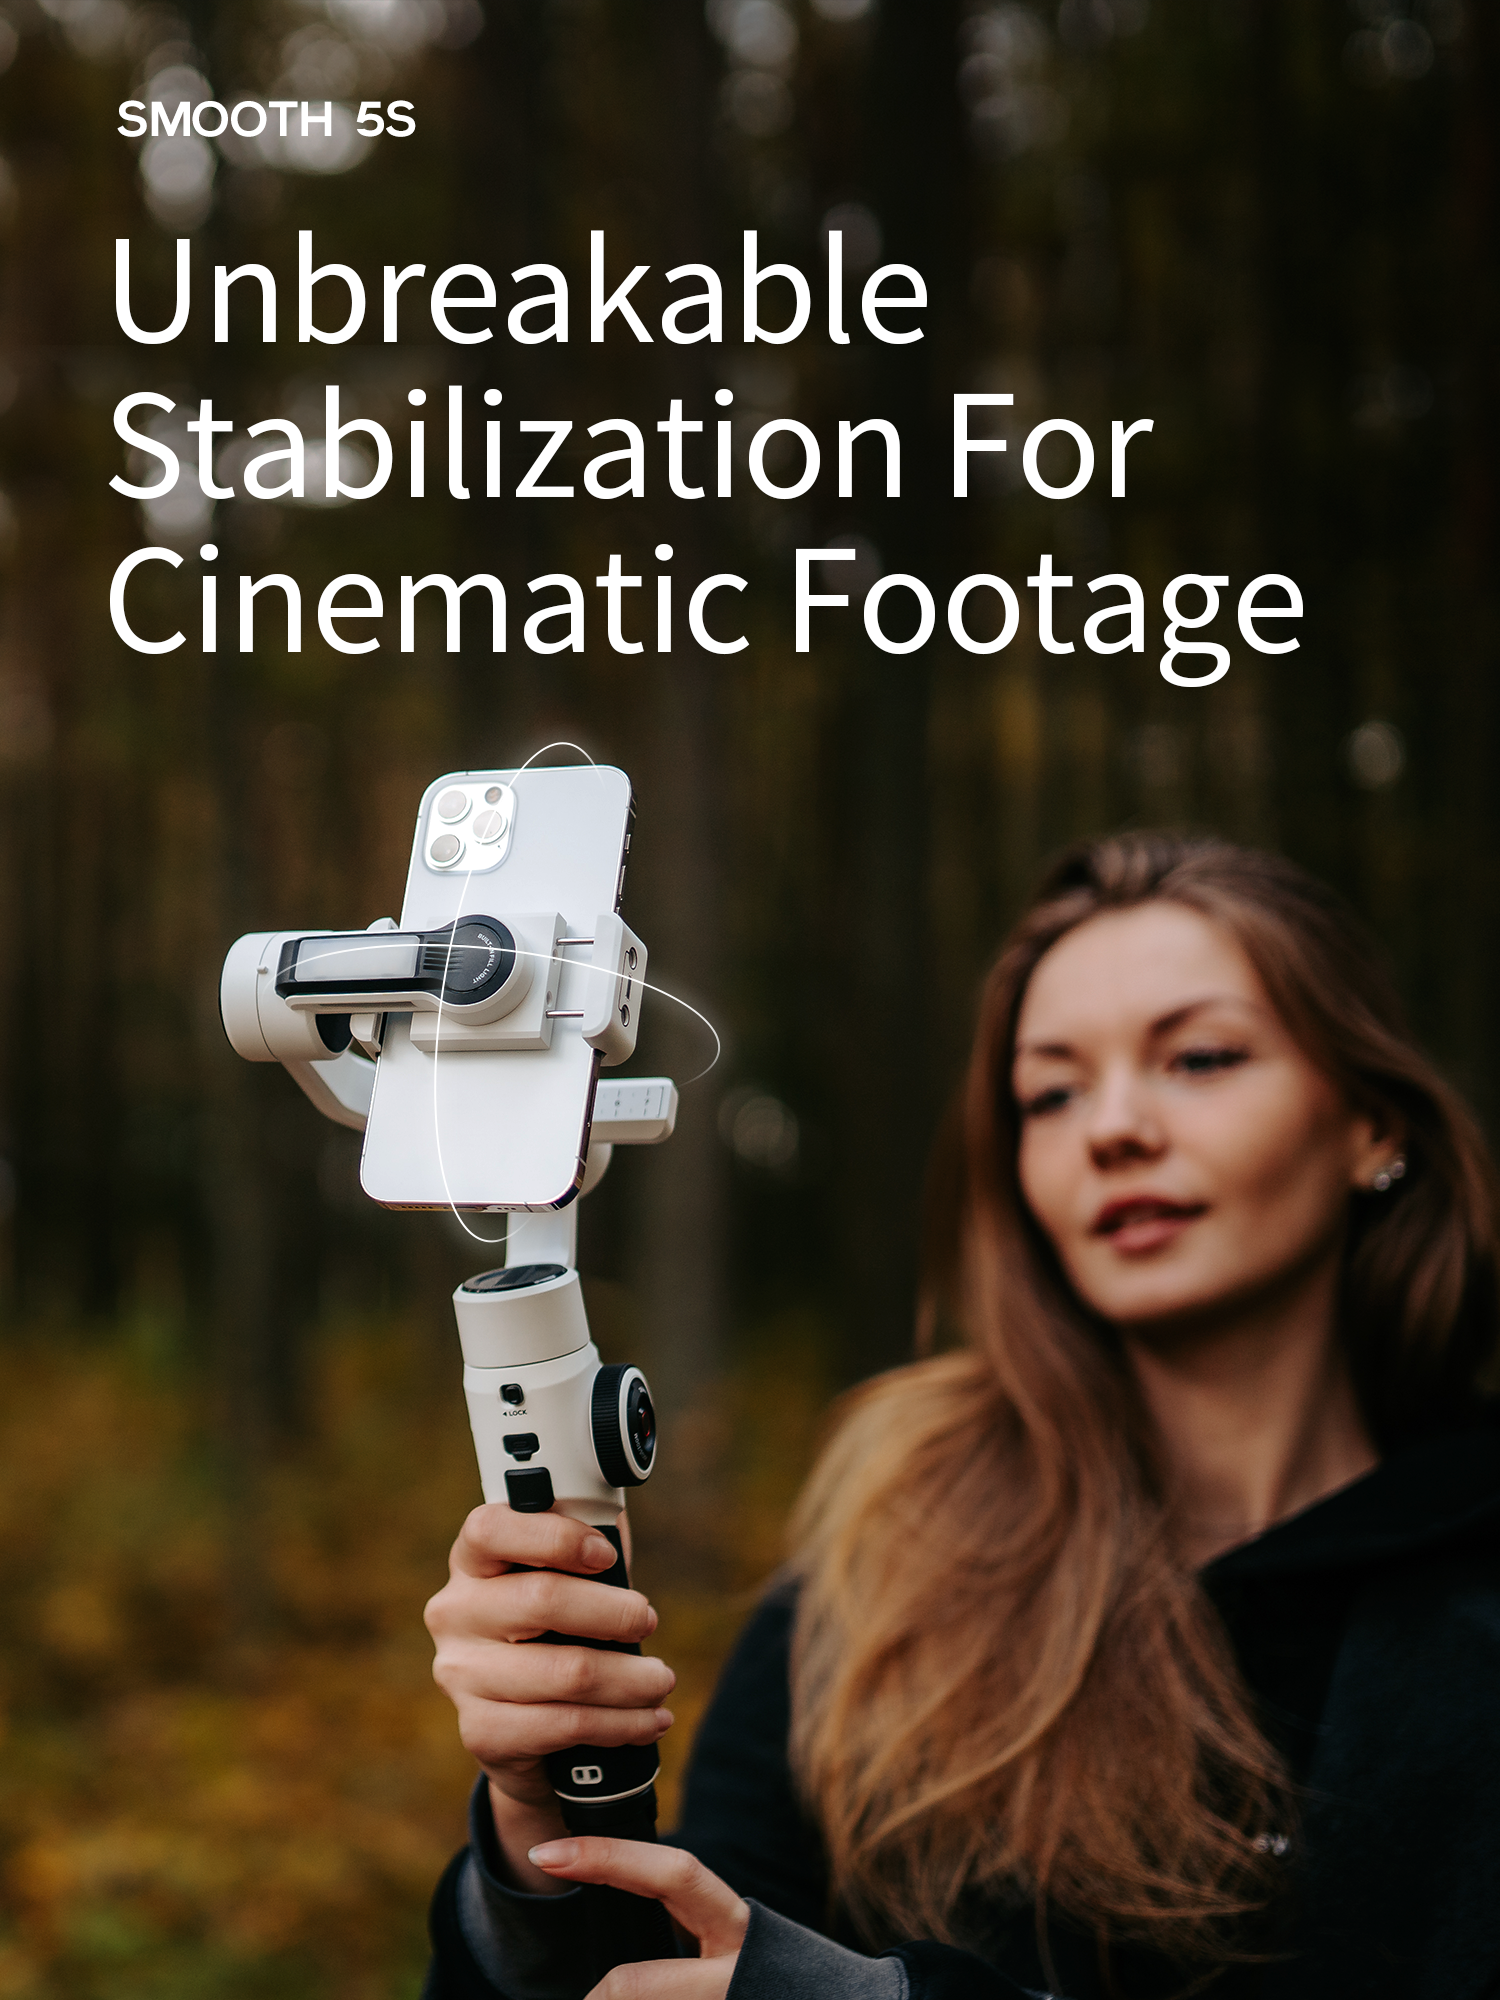 04 Unbreakable Stabilization For Cinematic Footage